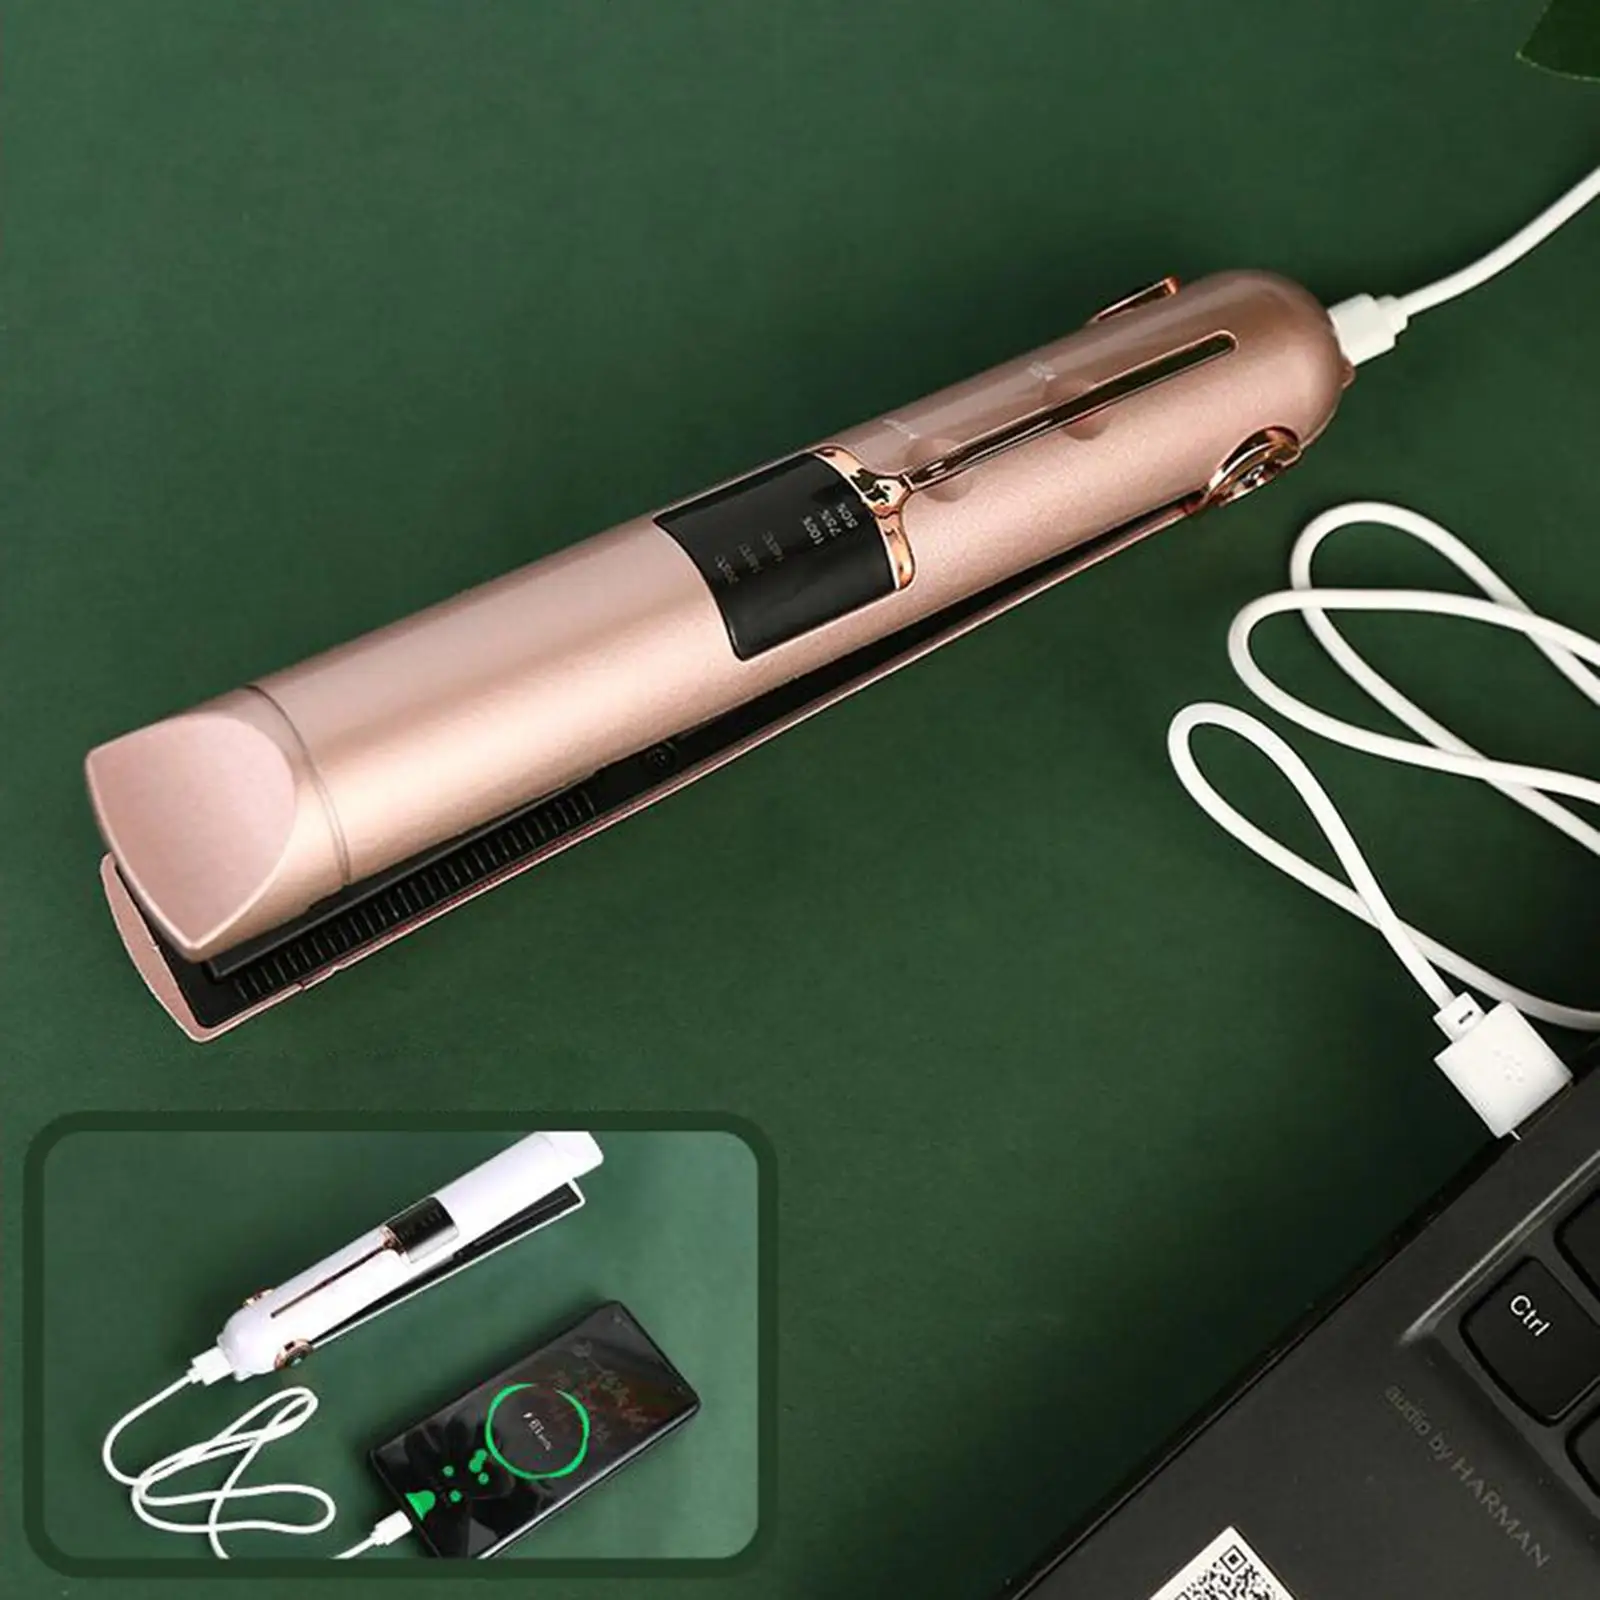 Compact Cordless Hair Curler Straightener 3-Level Temp Fast Heating ABS Automatic Styling Tools Power Bank for Salon DIY Home